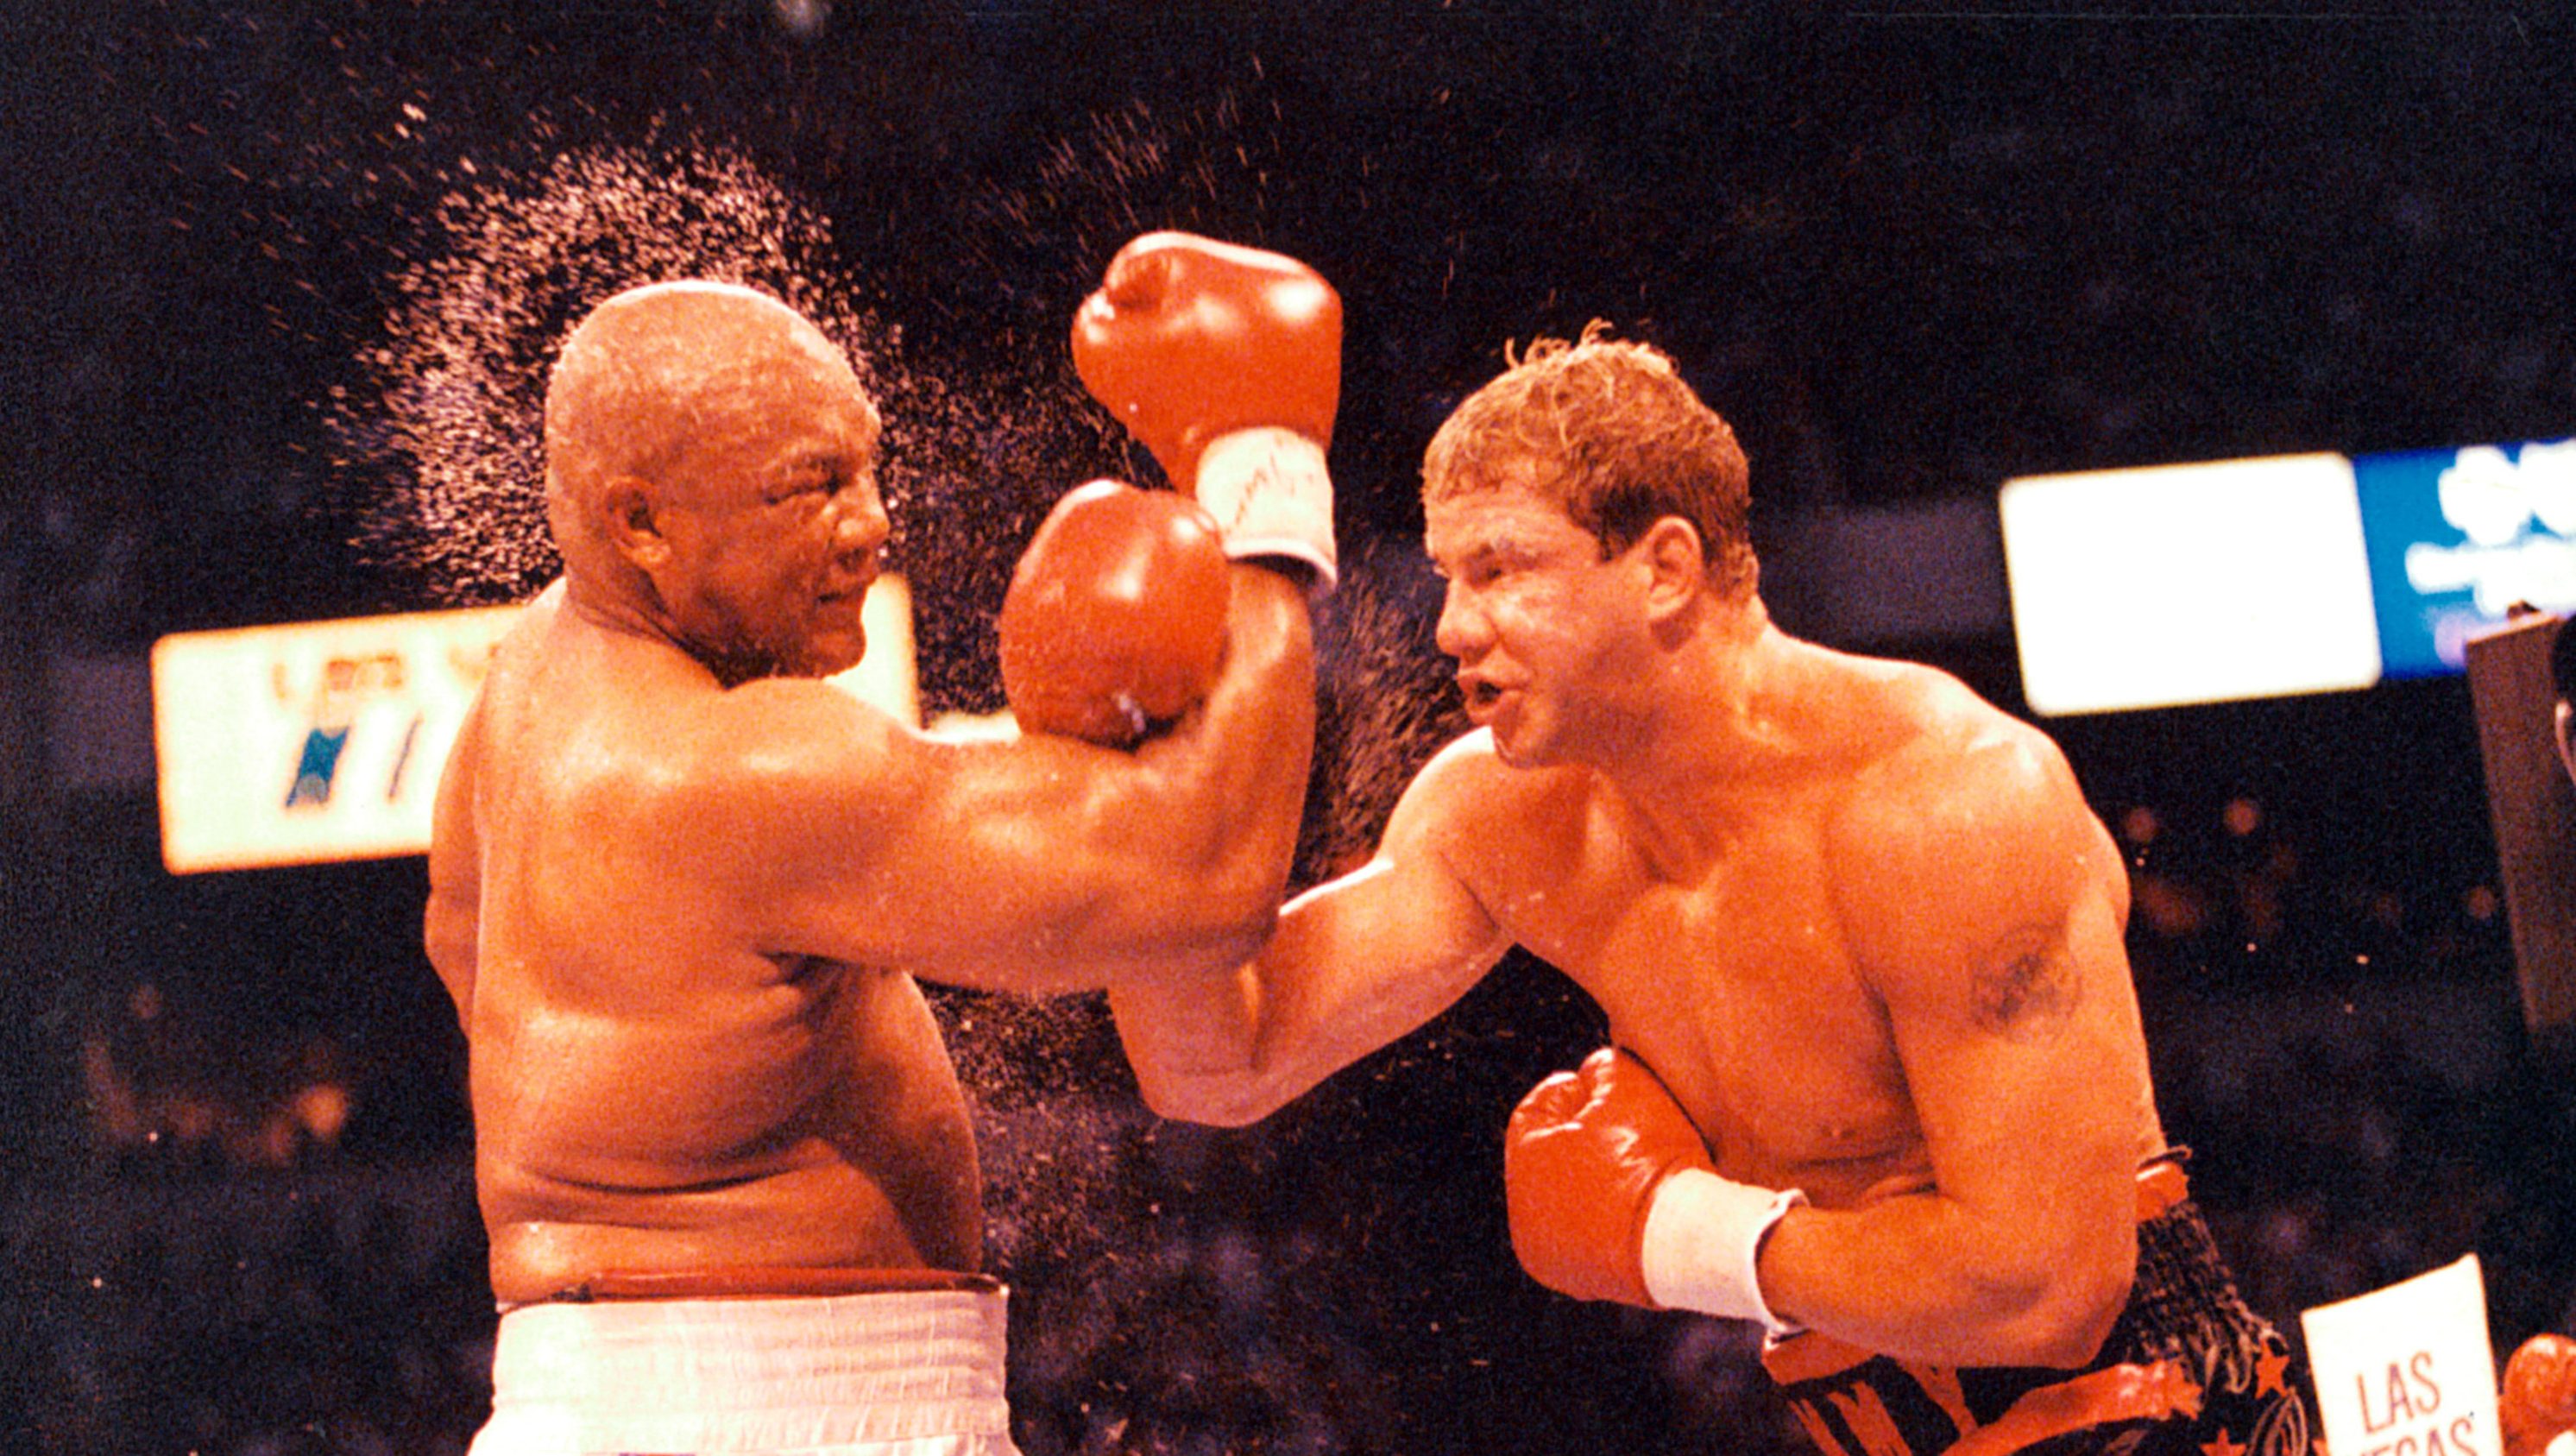 LAS VEGAS - JUNE 7, 1993: Tommy Morrison (R) connects with a right punch against George Foreman at the Thomas & Mack Center, on June 7,1993 in Las Vegas, Nevada. Tommy Morrison won by a UD 12 to claim a share of the heavyweight championship. (The Ring Magazine/Getty Images)